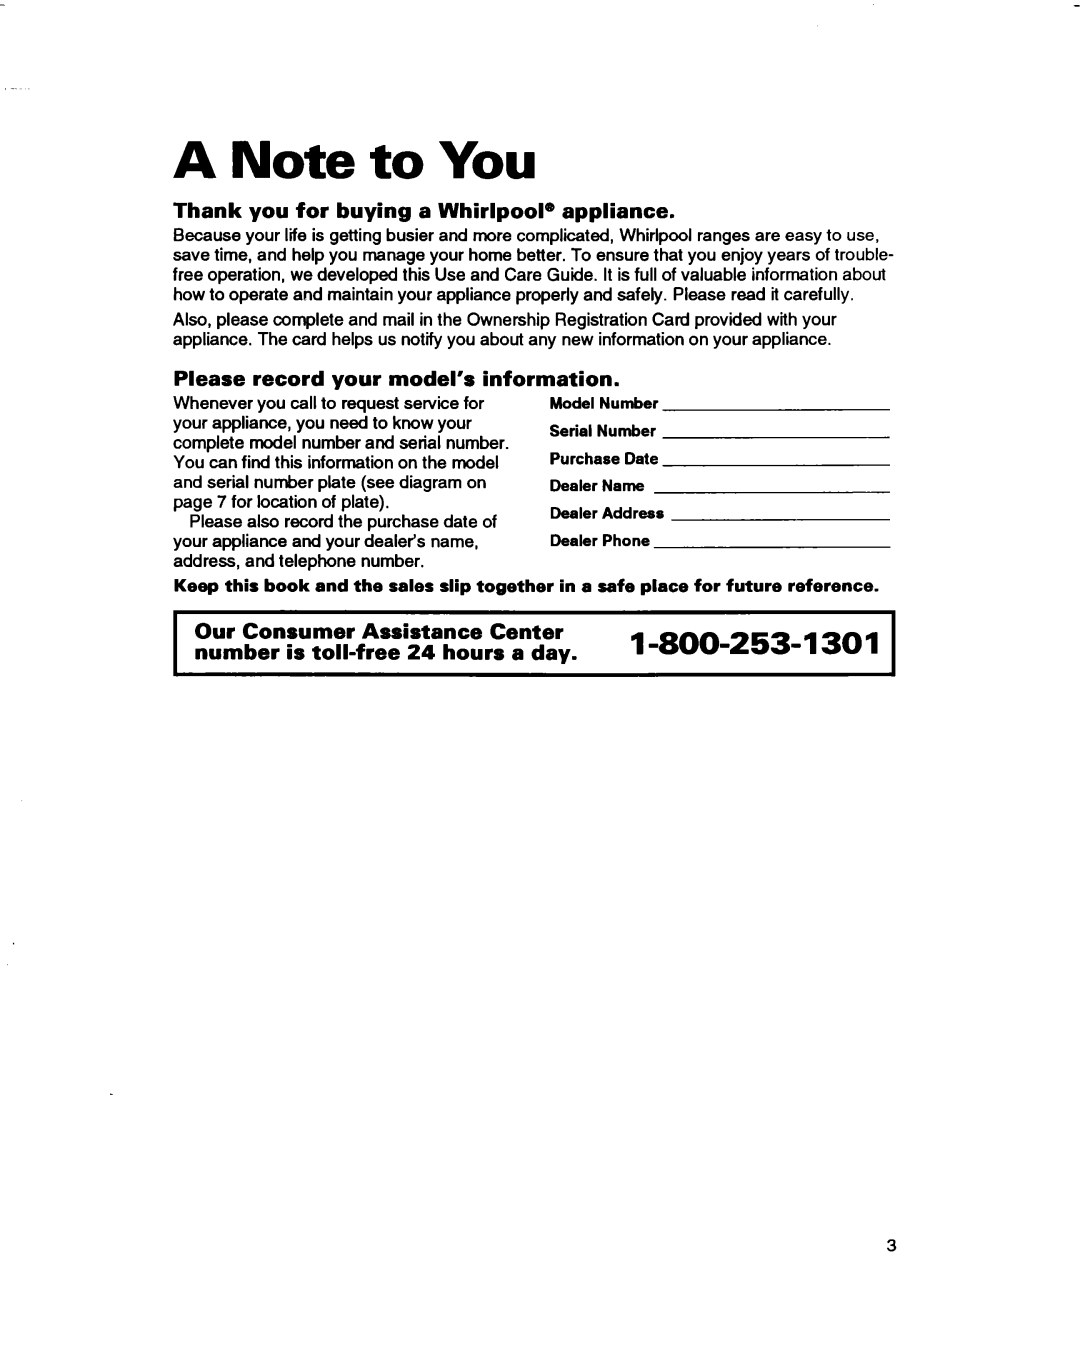 Whirlpool RF375PXD A Note to You, I-800-253-1, Thank you for buying a Whirlpool” appliance, Our Consumer Assistance, a day 